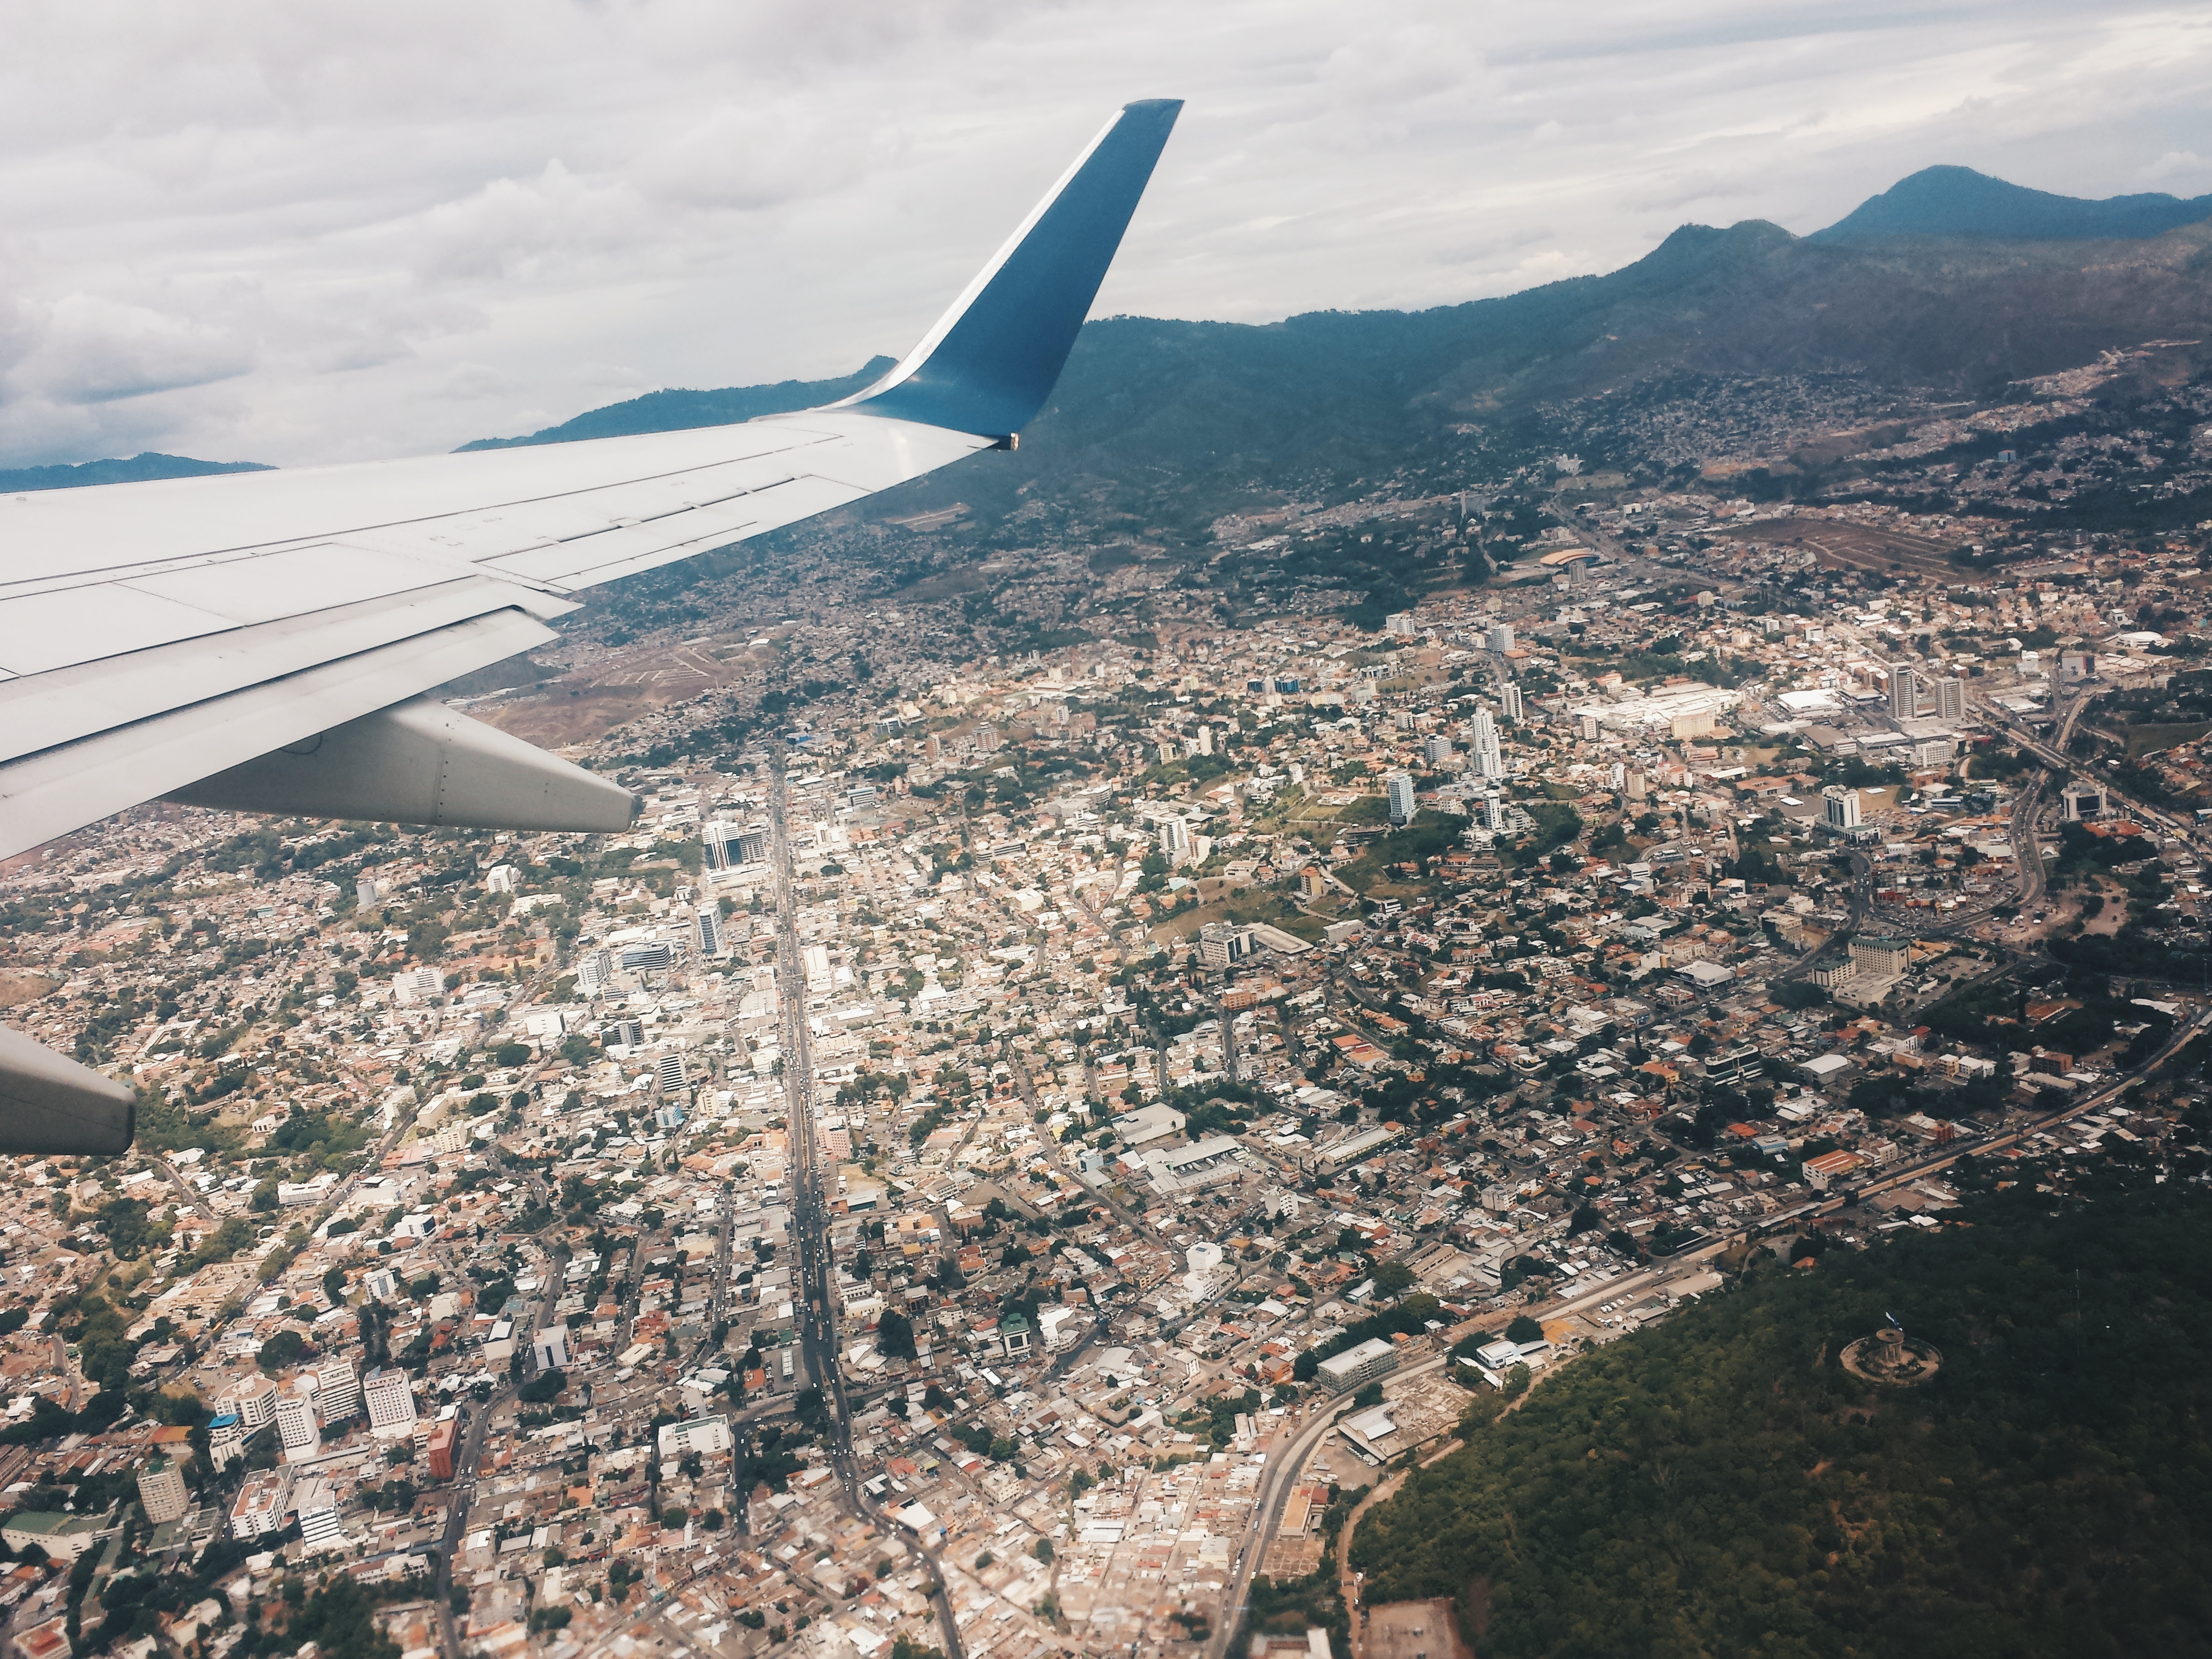 The capital of Tegucigalpa can be seen under our plane's wing. The sprawl of the city is littered with lowrise houses and the warm tones of clay roofs. In the background are the lush green mountains that are so characteristic of the Honduran landscape.